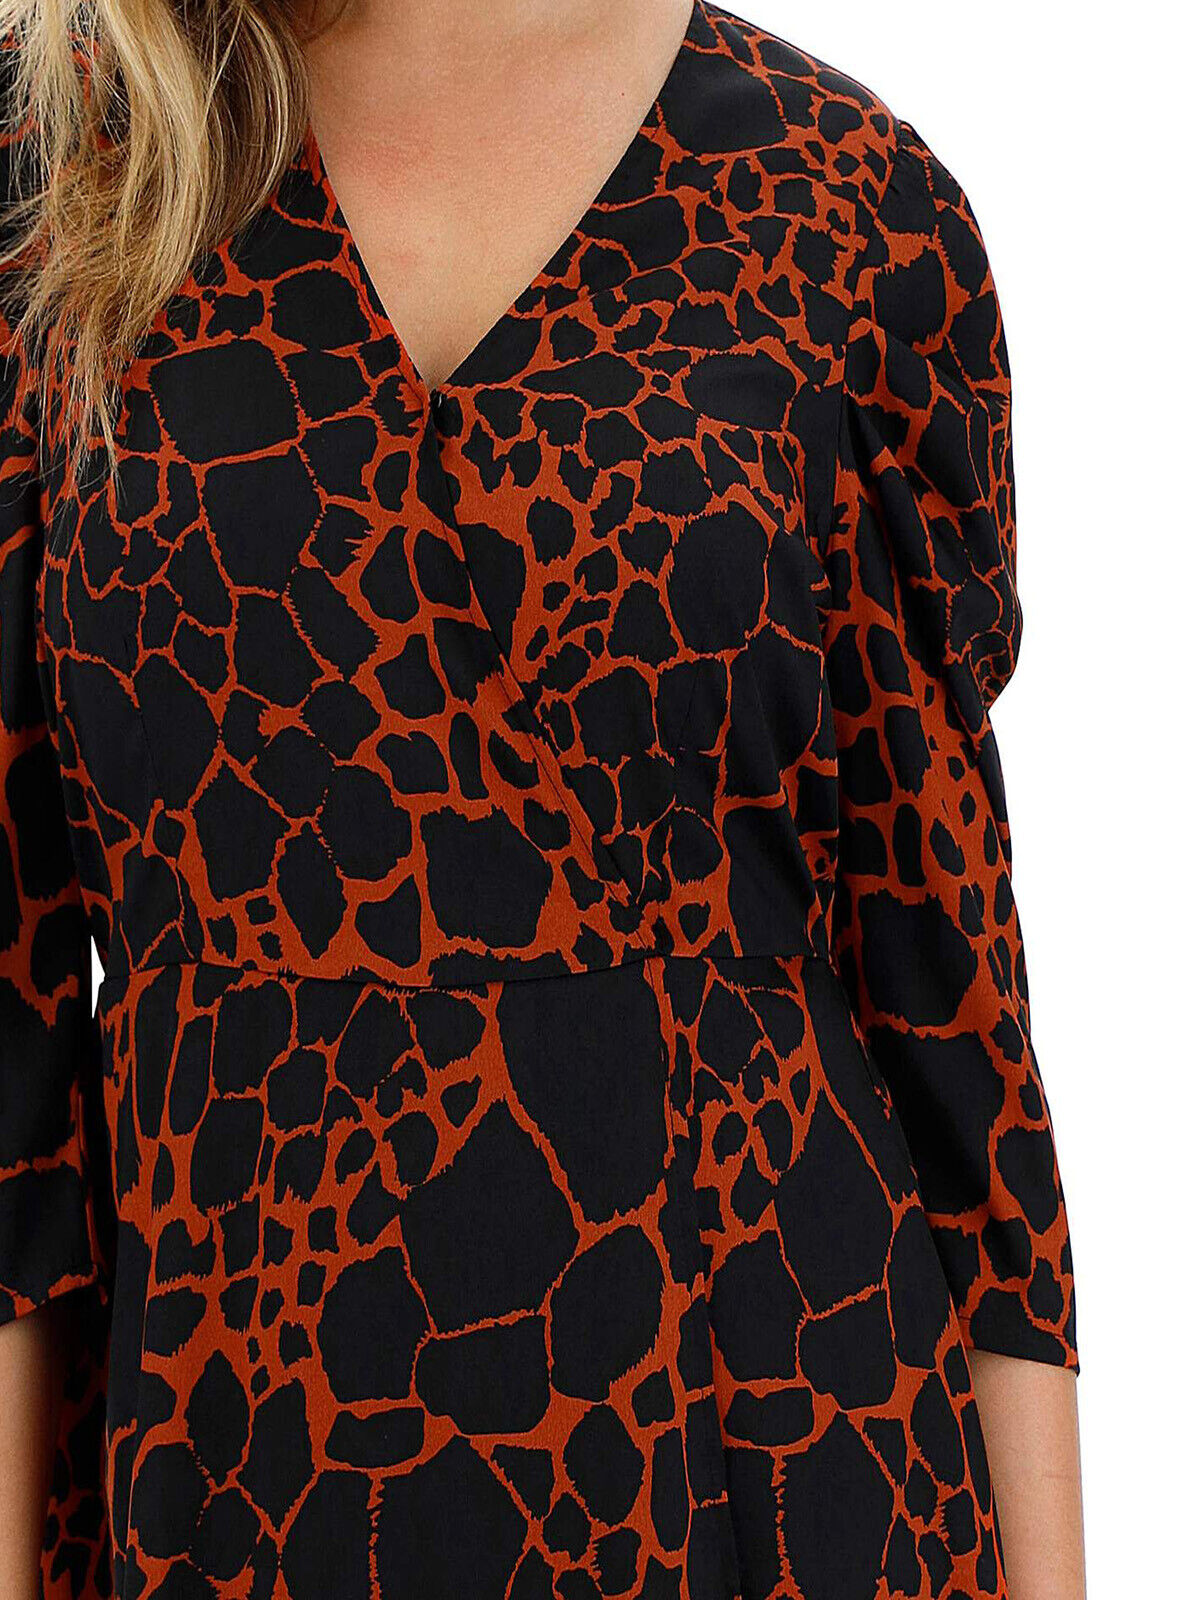 New Simply Be Black Animal Print Wrap Front Dress Sizes 16, 18, 26, 28, 32